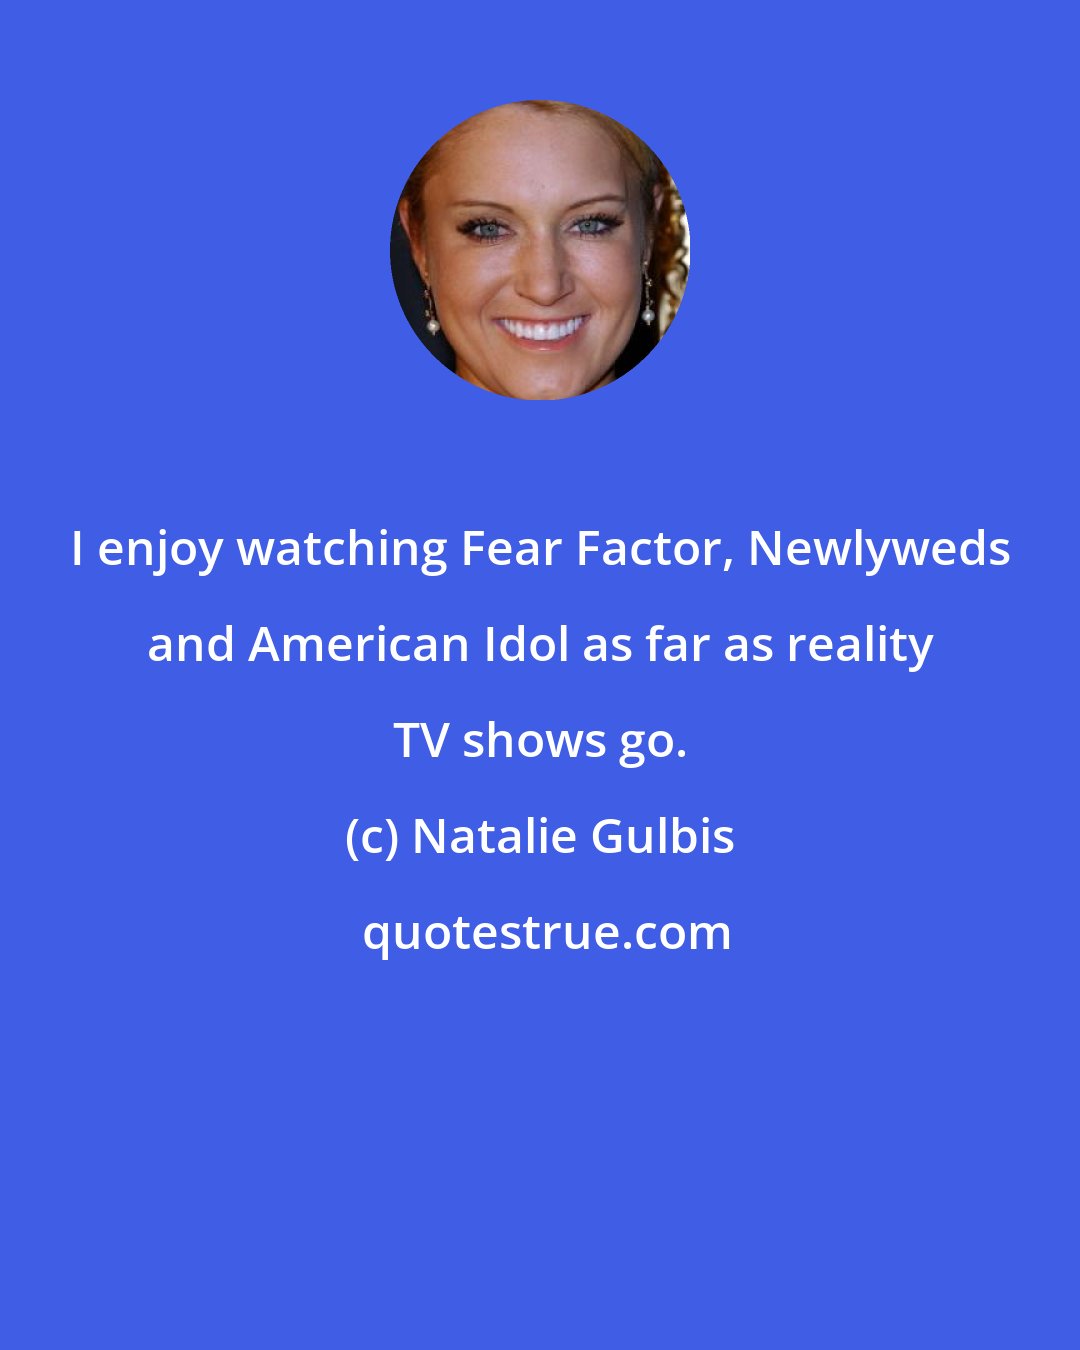 Natalie Gulbis: I enjoy watching Fear Factor, Newlyweds and American Idol as far as reality TV shows go.